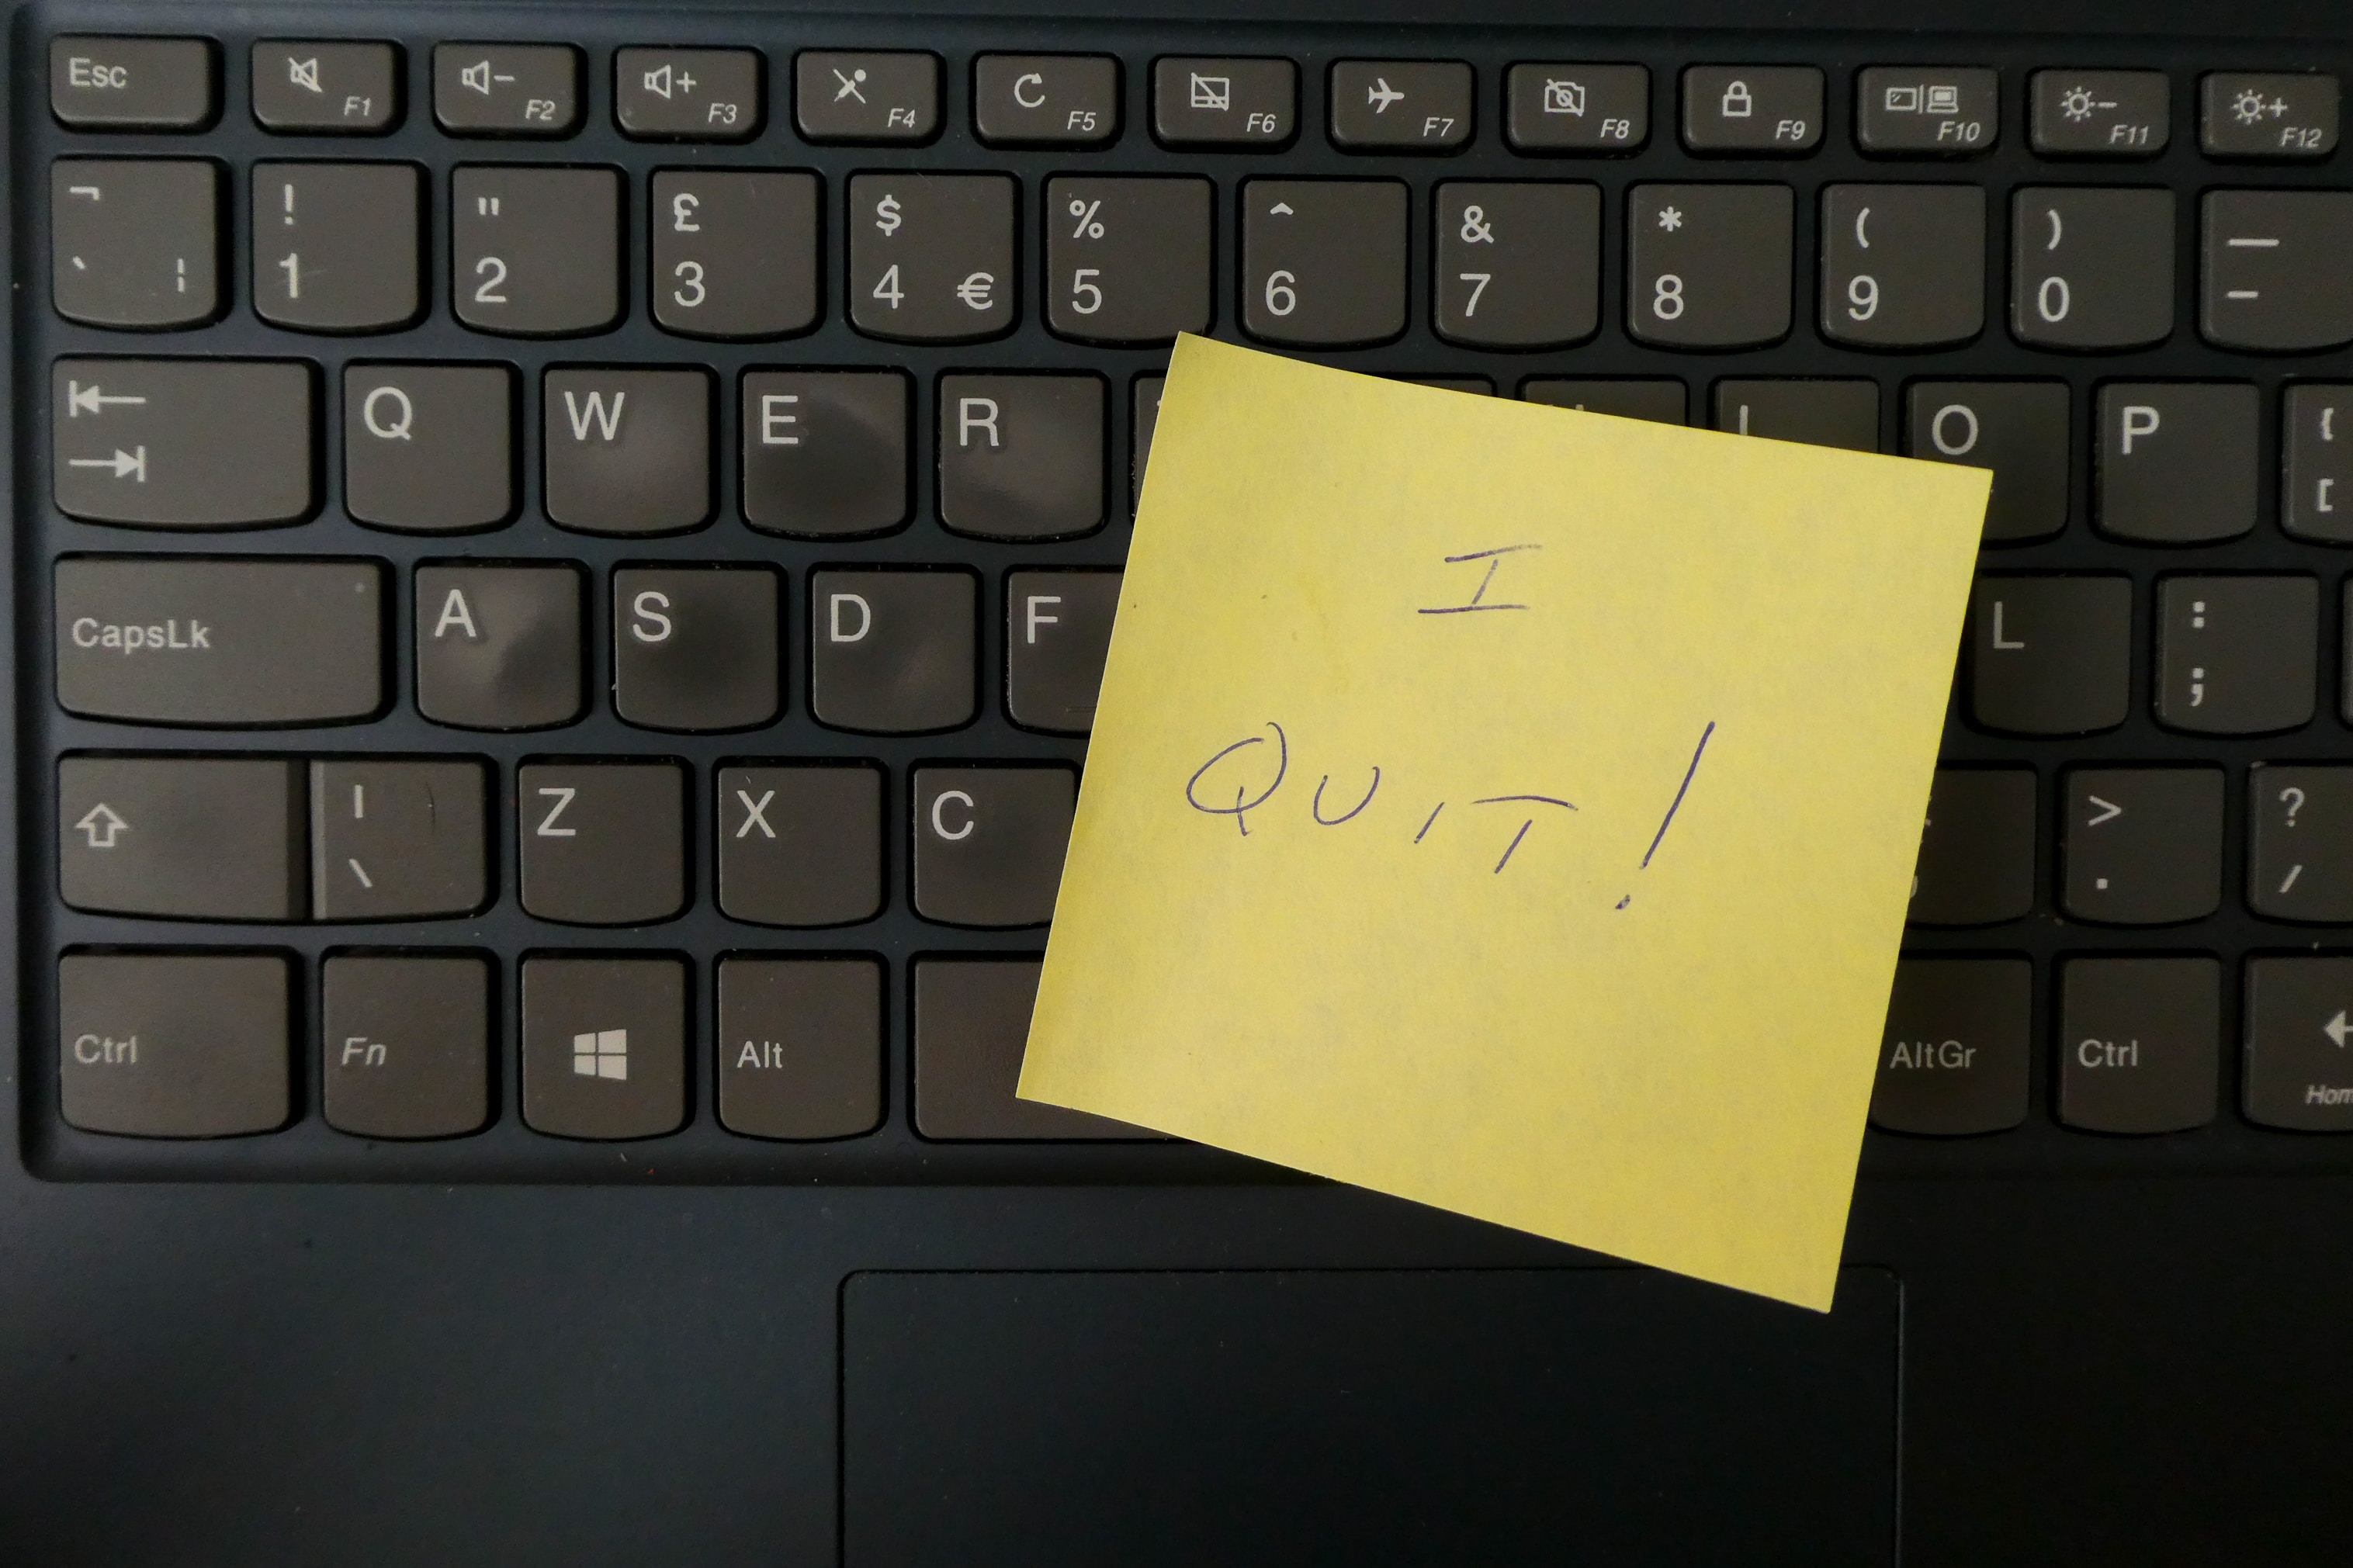 An image of a sticky note with "I quit" written on it, stuck on a keyboard